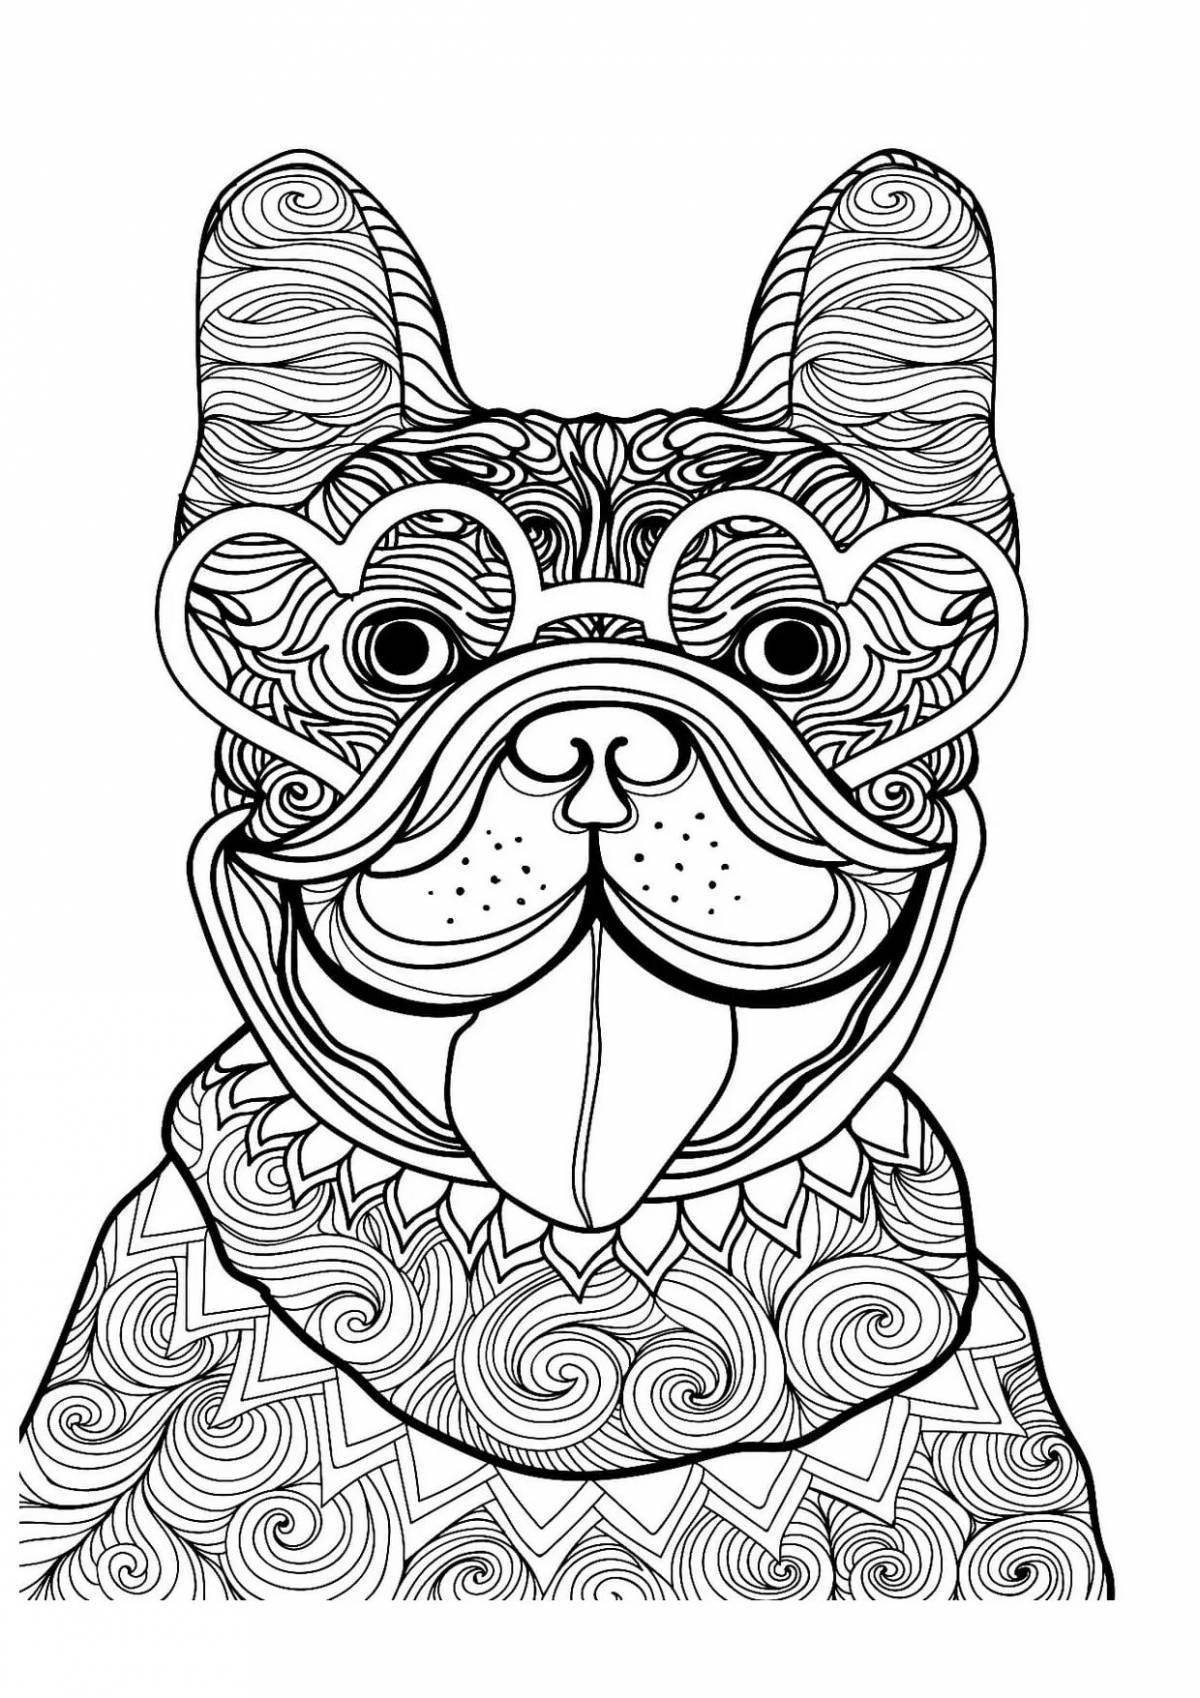 Amazing anti-stress coloring book for dogs